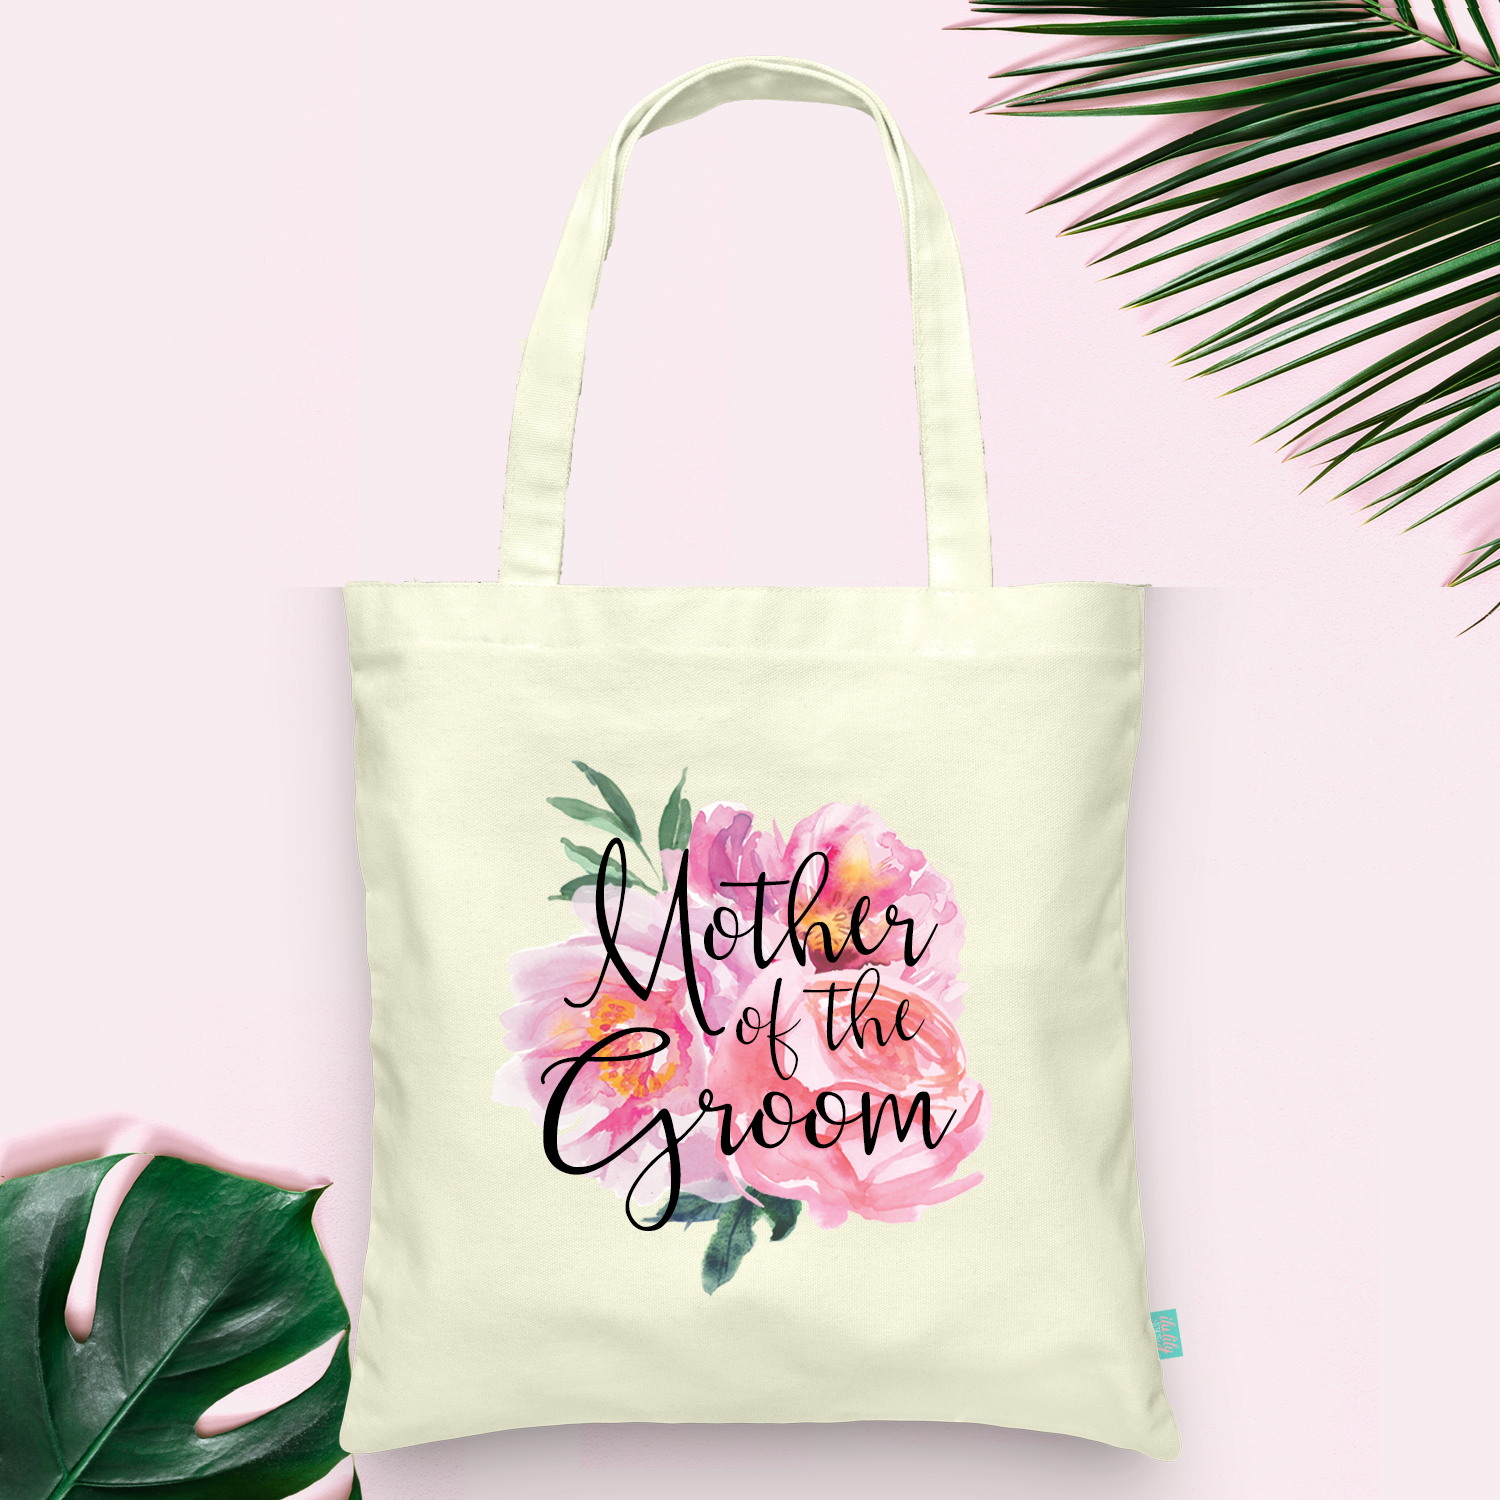 Wedding Party Tote Bag | Gift for Mother of the Groom | Floral Watercolor